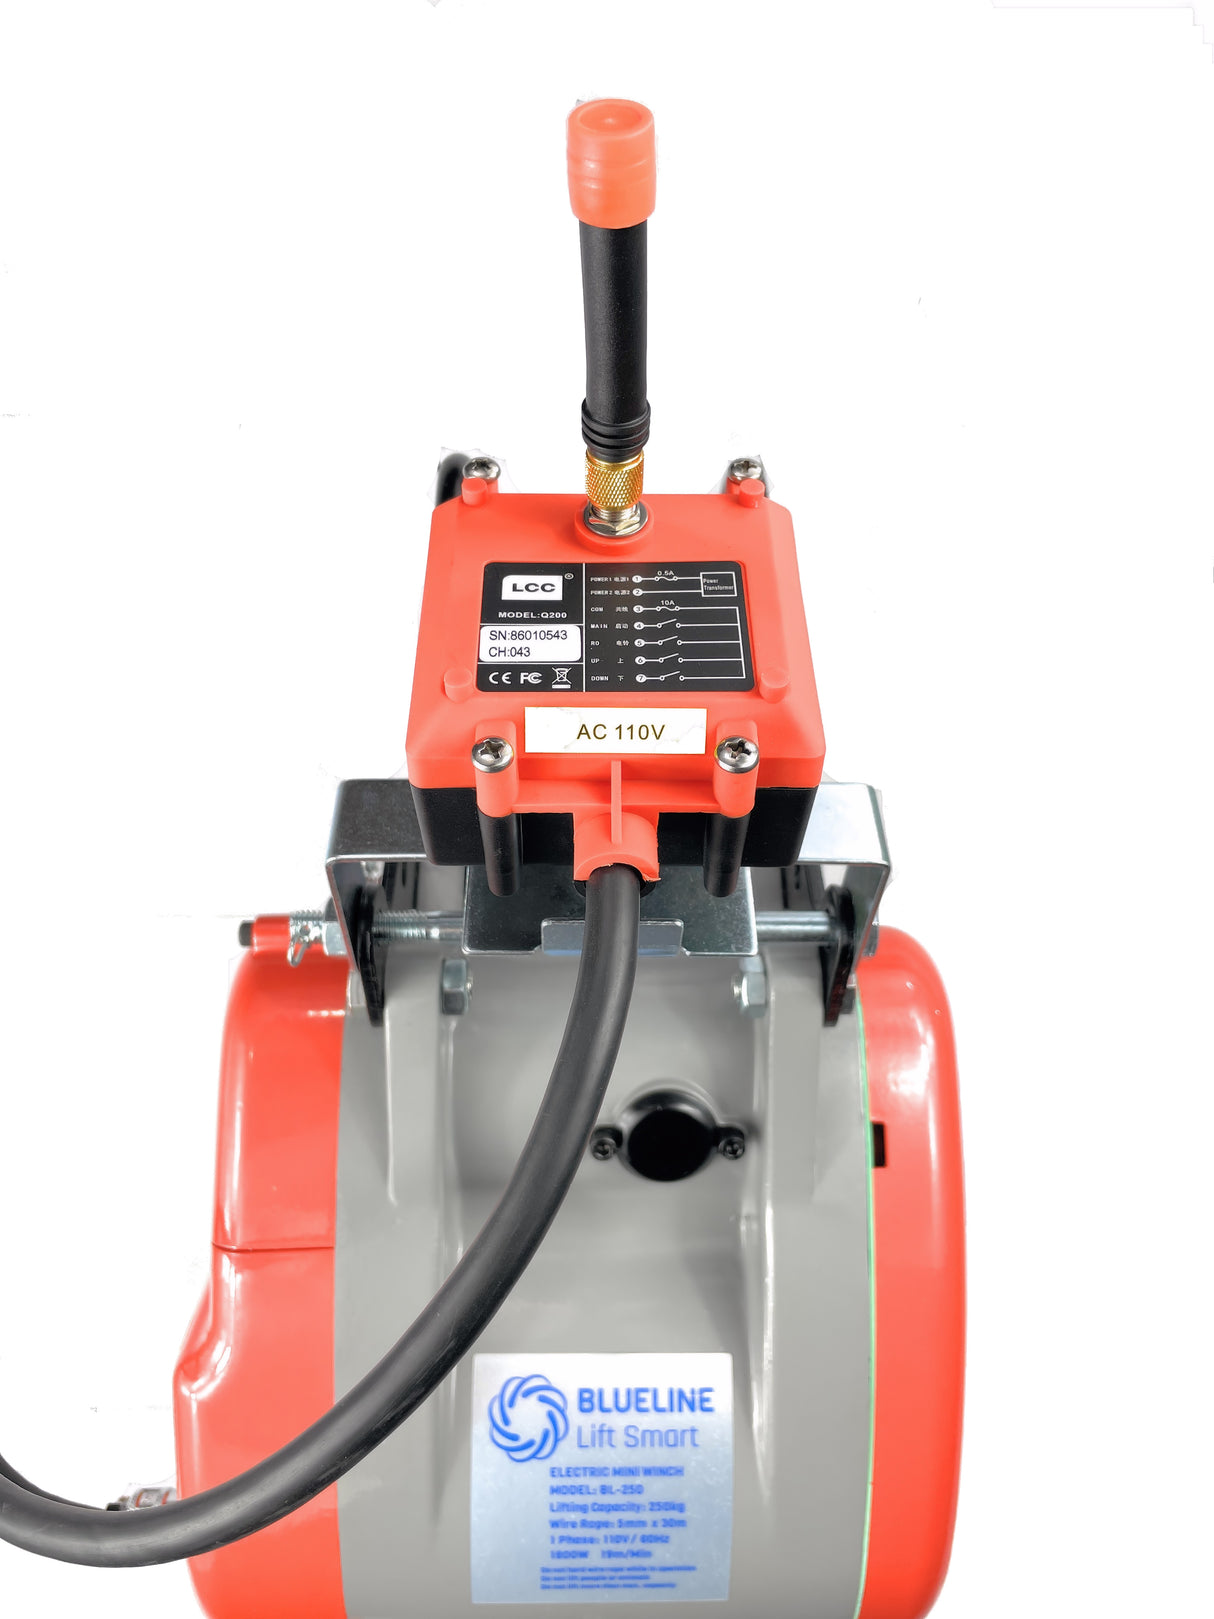 BLUELINE 550lb / 250kg Electric Portable Hoist with 30m (100ft) of Lifting Cable with Wireless Remote Control